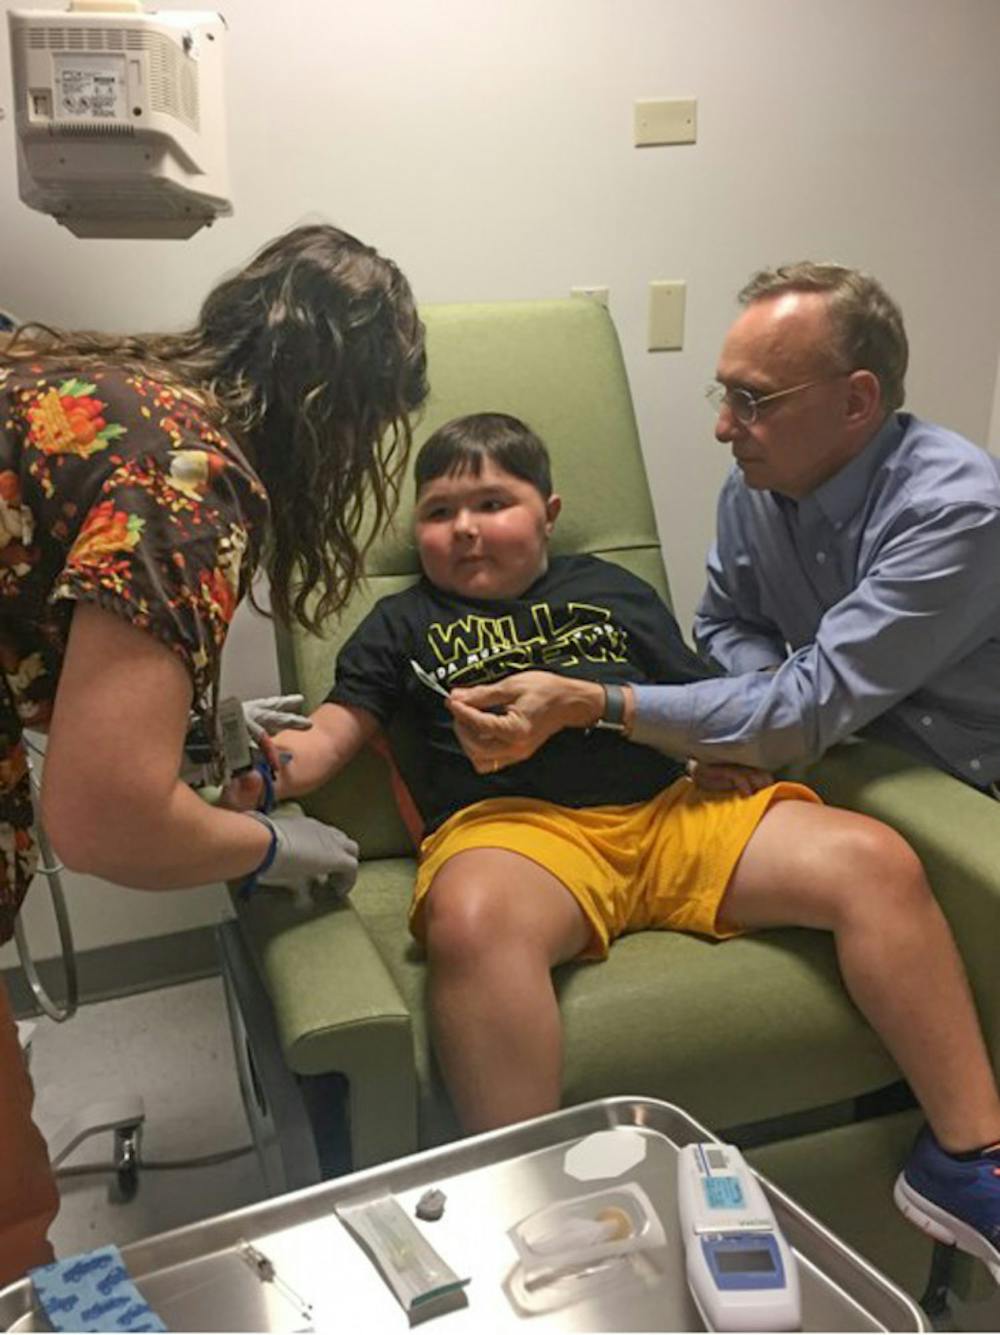 <p dir="ltr">A UF Health Shands Hospital nurse tends to 9-year-old Will Barkoskie’s IV while Dr. Barry Byrne, a UF College of Medicine professor, looks on. Diagnosed with Duchenne muscular dystrophy, Barkoskie is receiving groundbreaking treatment at Shands.</p>